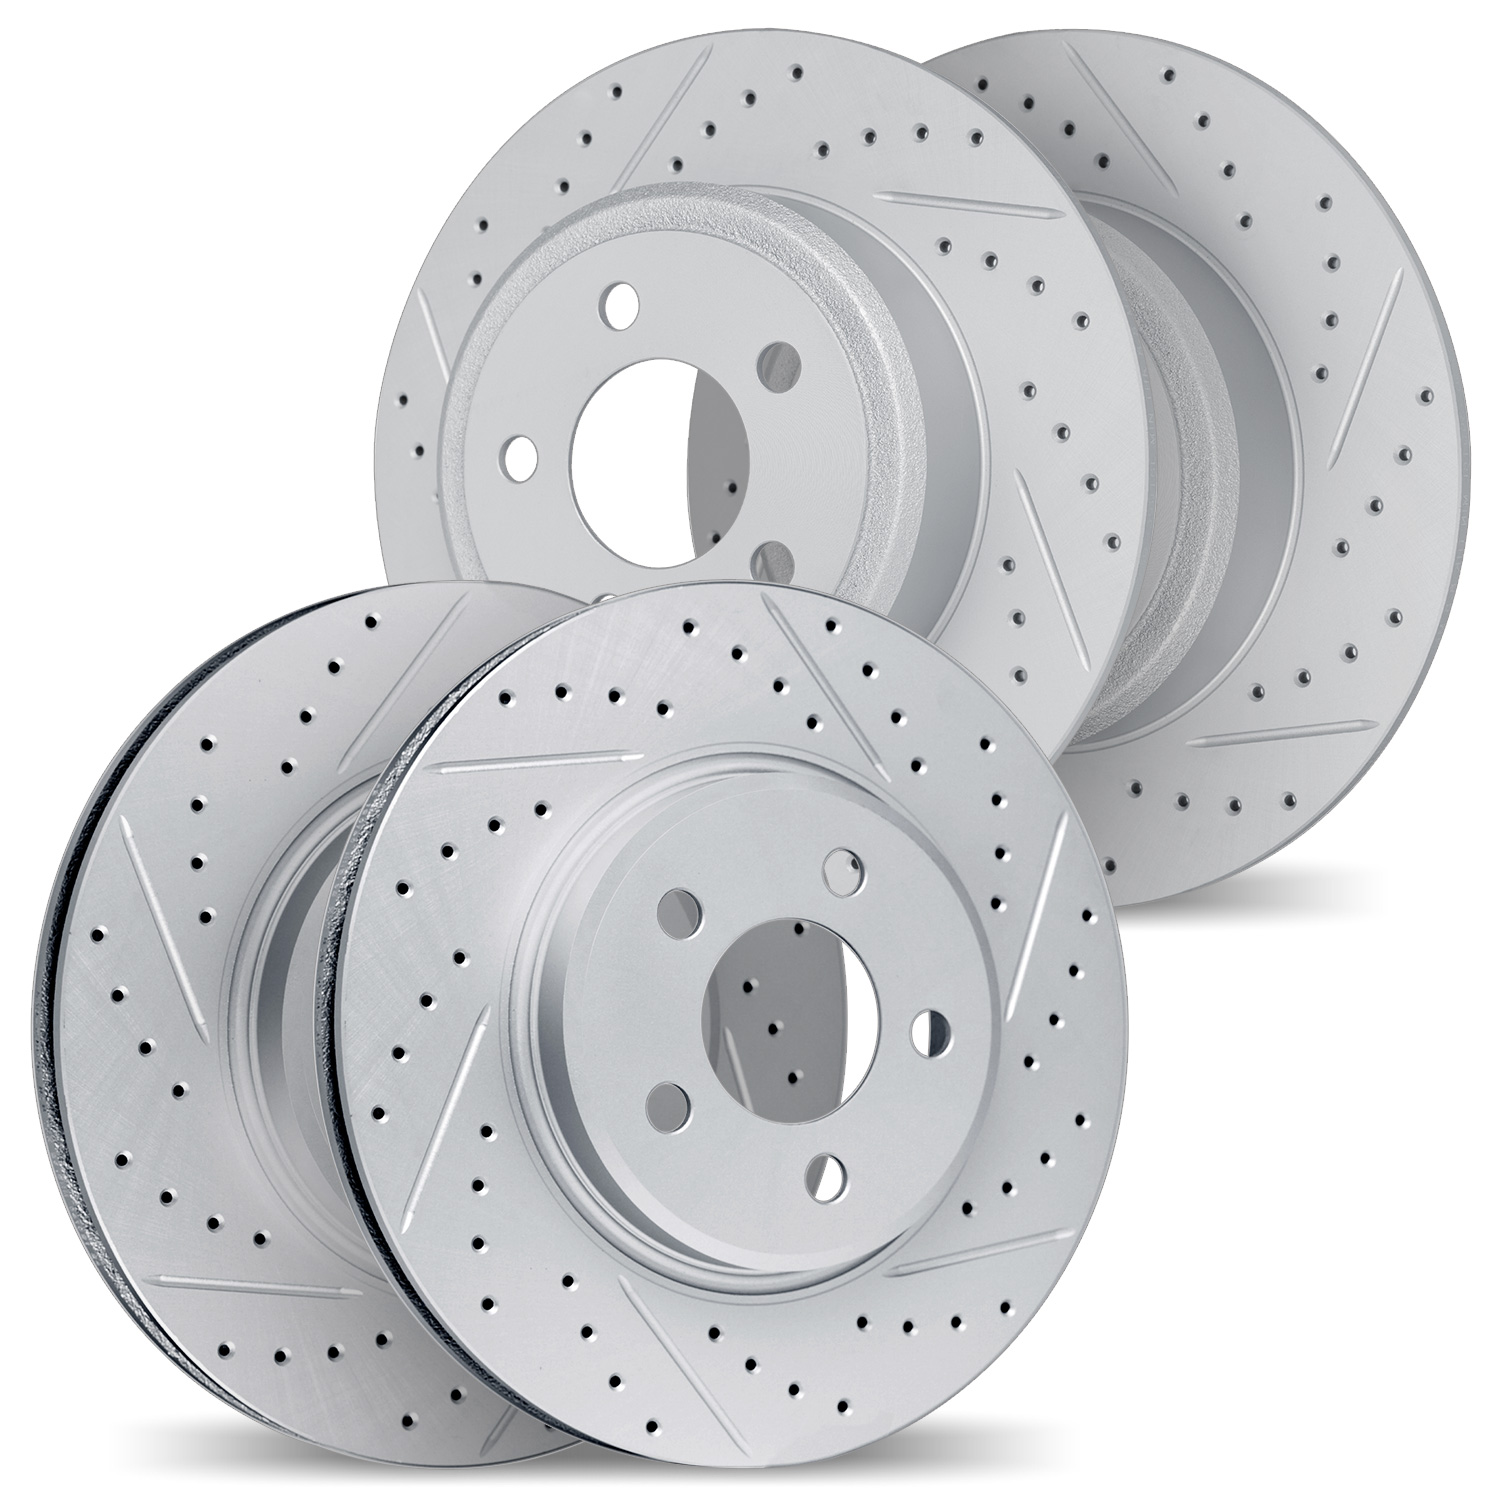 2004-59027 Geoperformance Drilled/Slotted Brake Rotors, 2005-2017 Acura/Honda, Position: Front and Rear